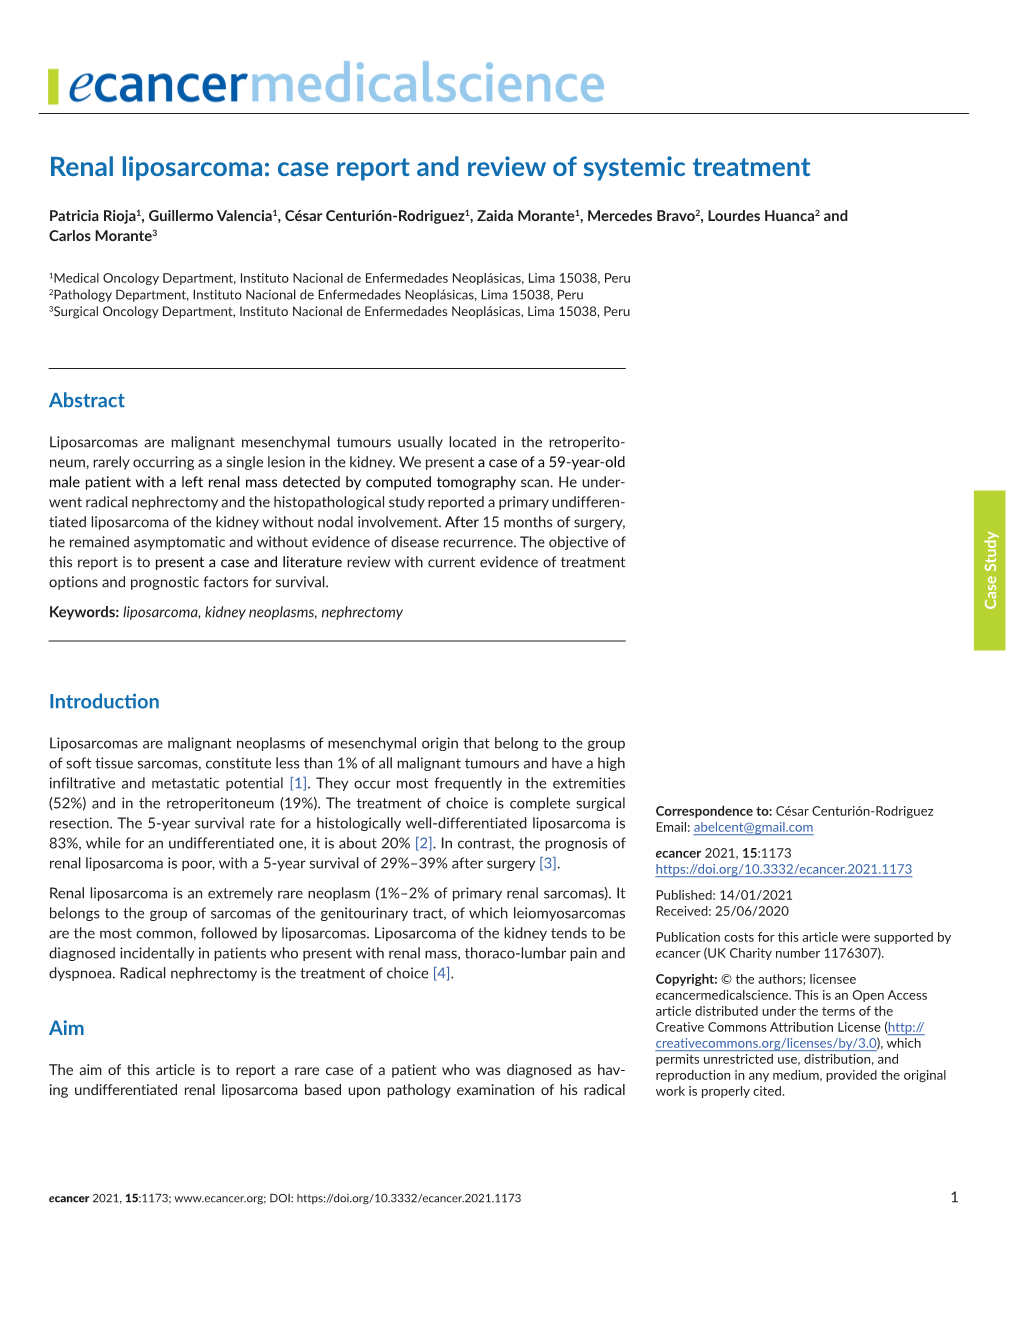 Renal Liposarcoma: Case Report and Review of Systemic Treatment